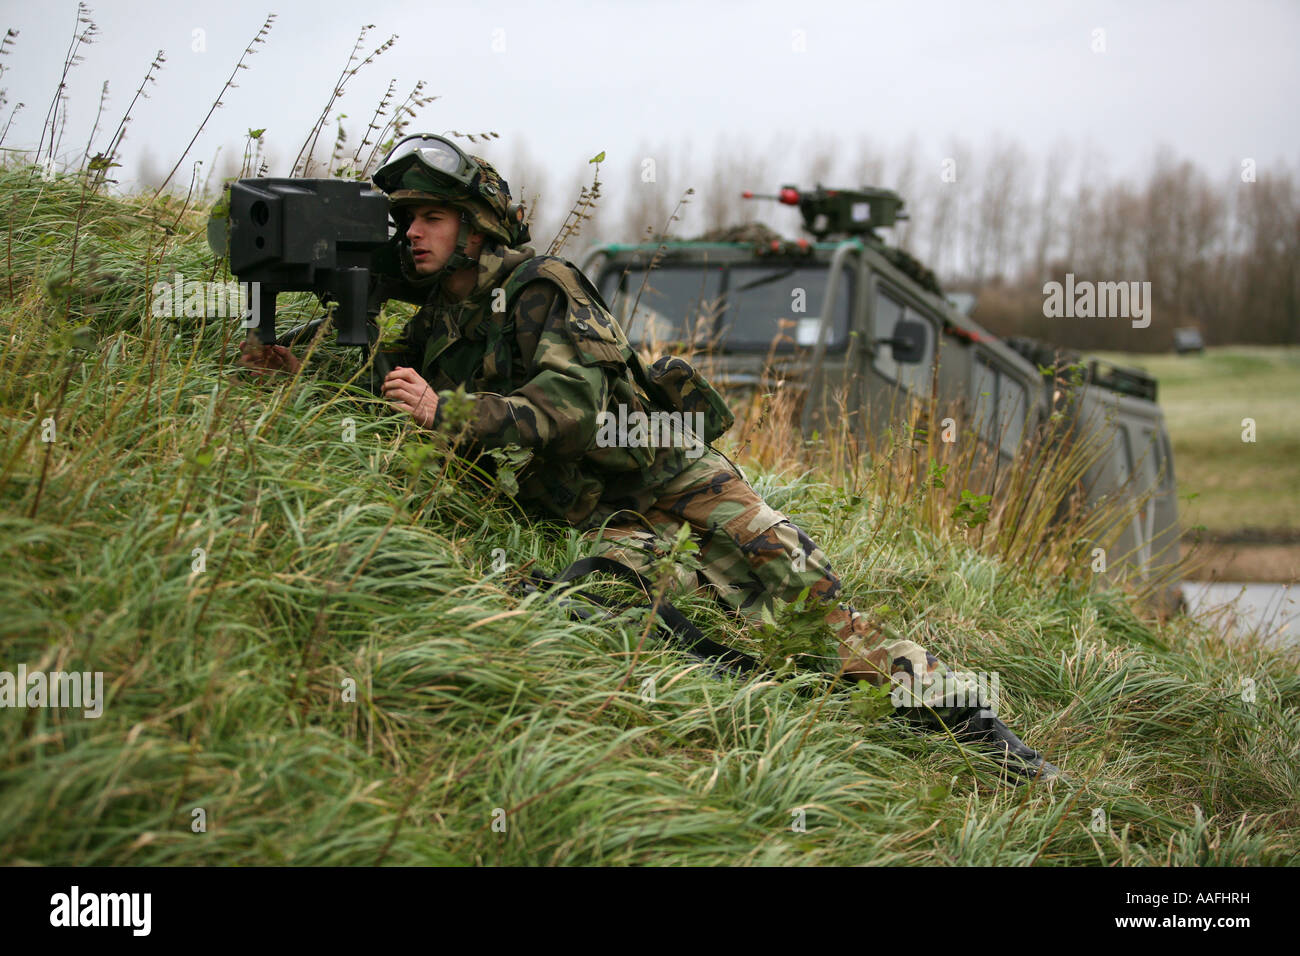 Soldiers simulating a warzone in Lauwersoog where a village is built  editorial use only no negative publicity Stock Photo